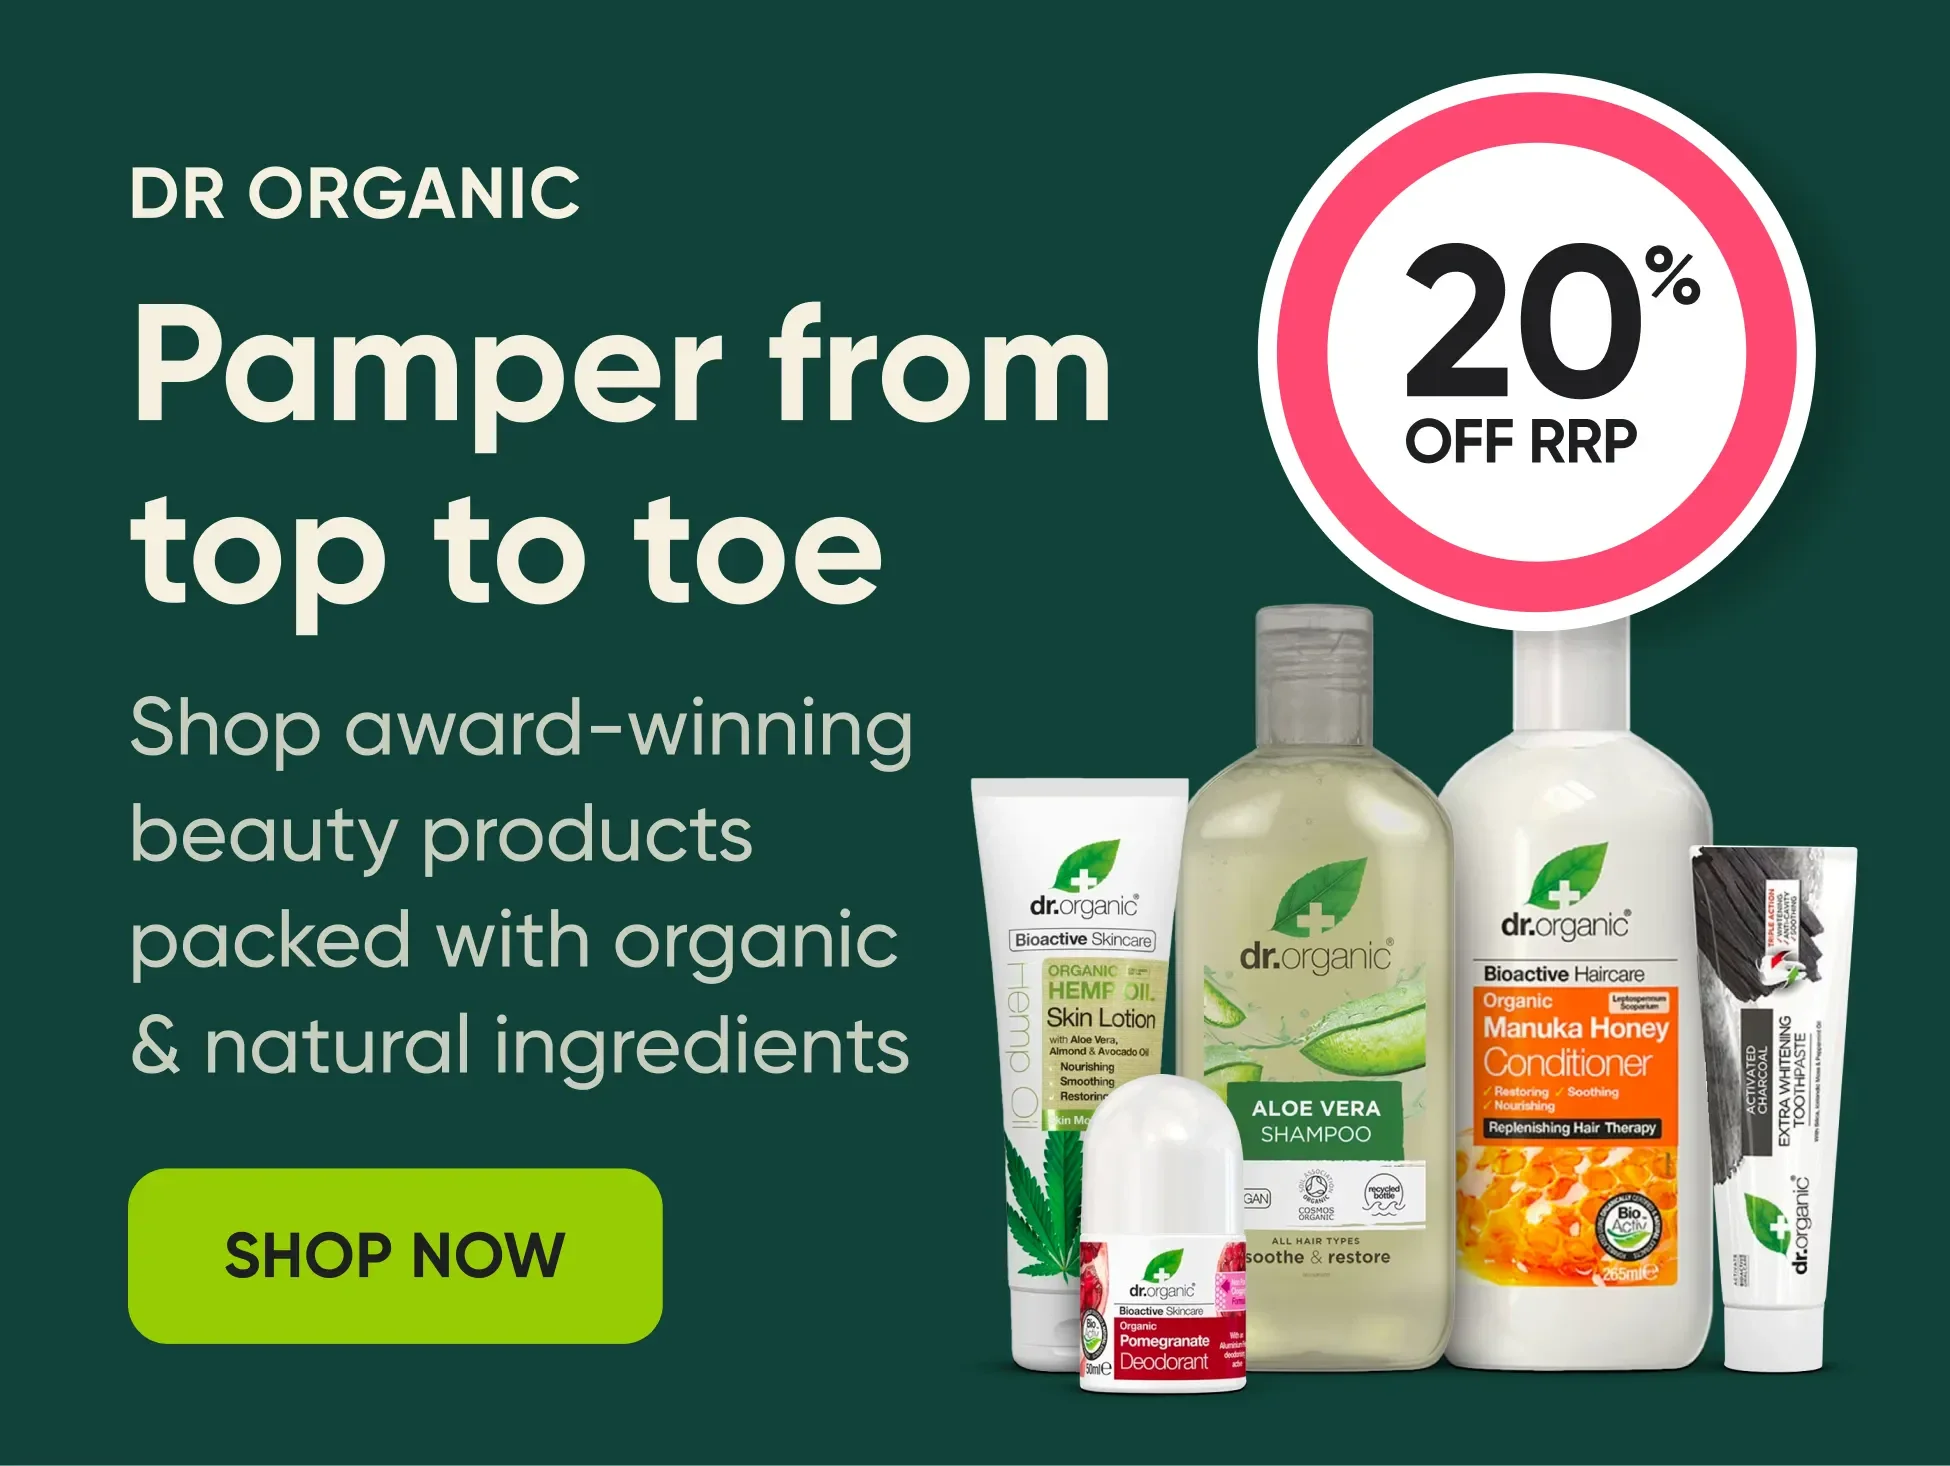 Total body bliss: Pamper from top to toe. Shop and save on award-winning beauty products packed with organic and natural ingredients.